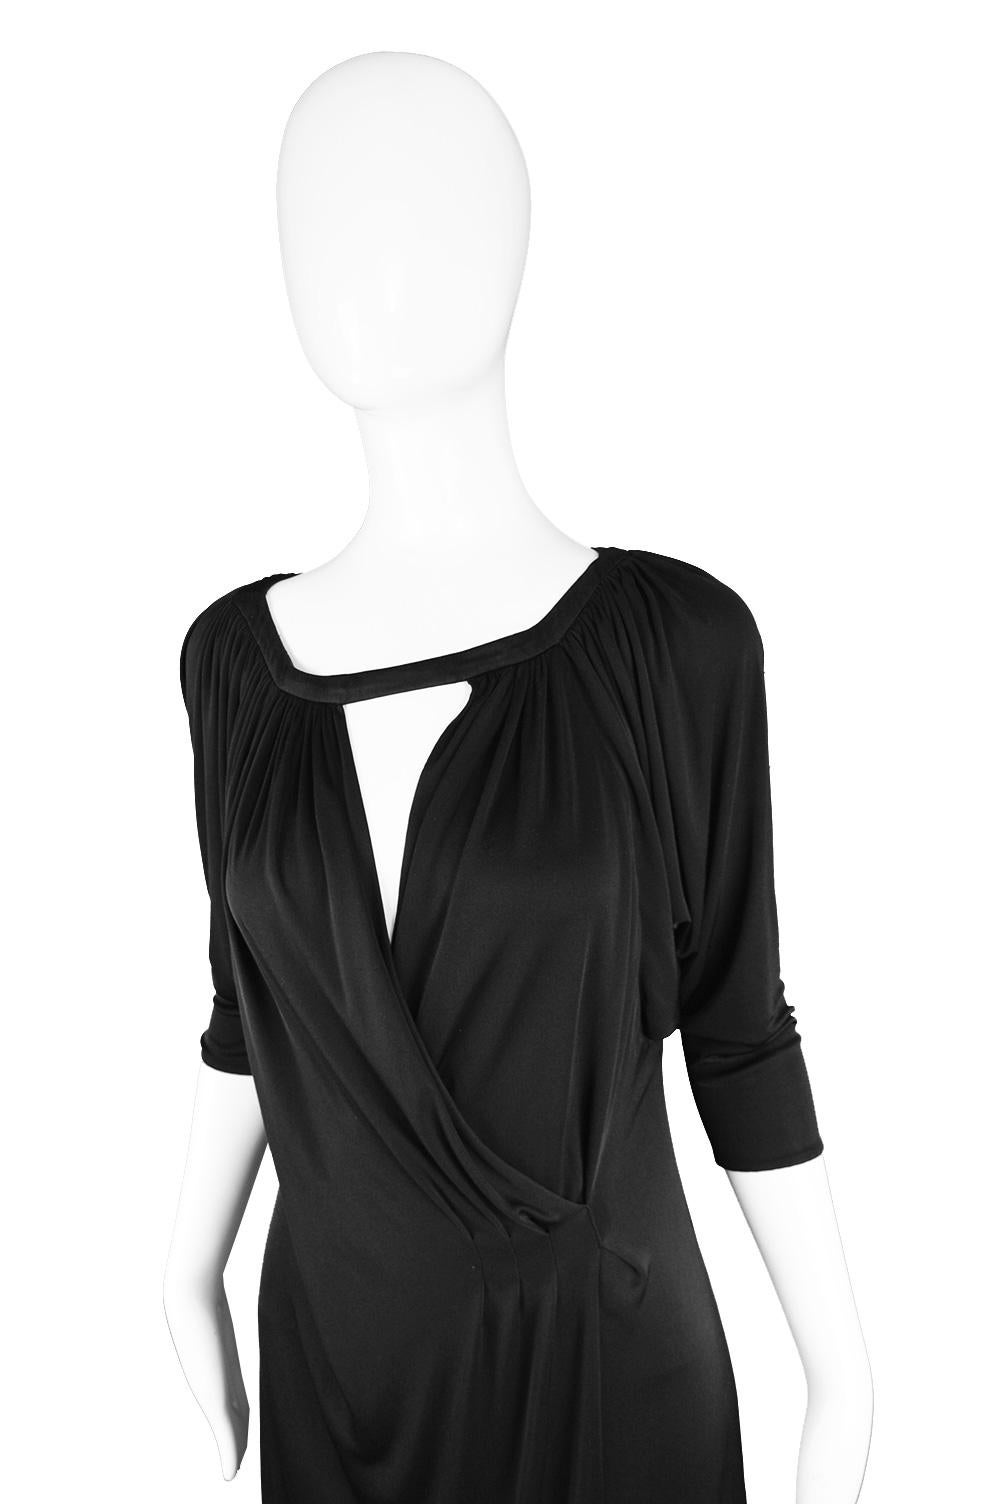 Gianni Versace Couture Black Jersey Batwing Vintage Dress, Spring 2001 For Sale 1